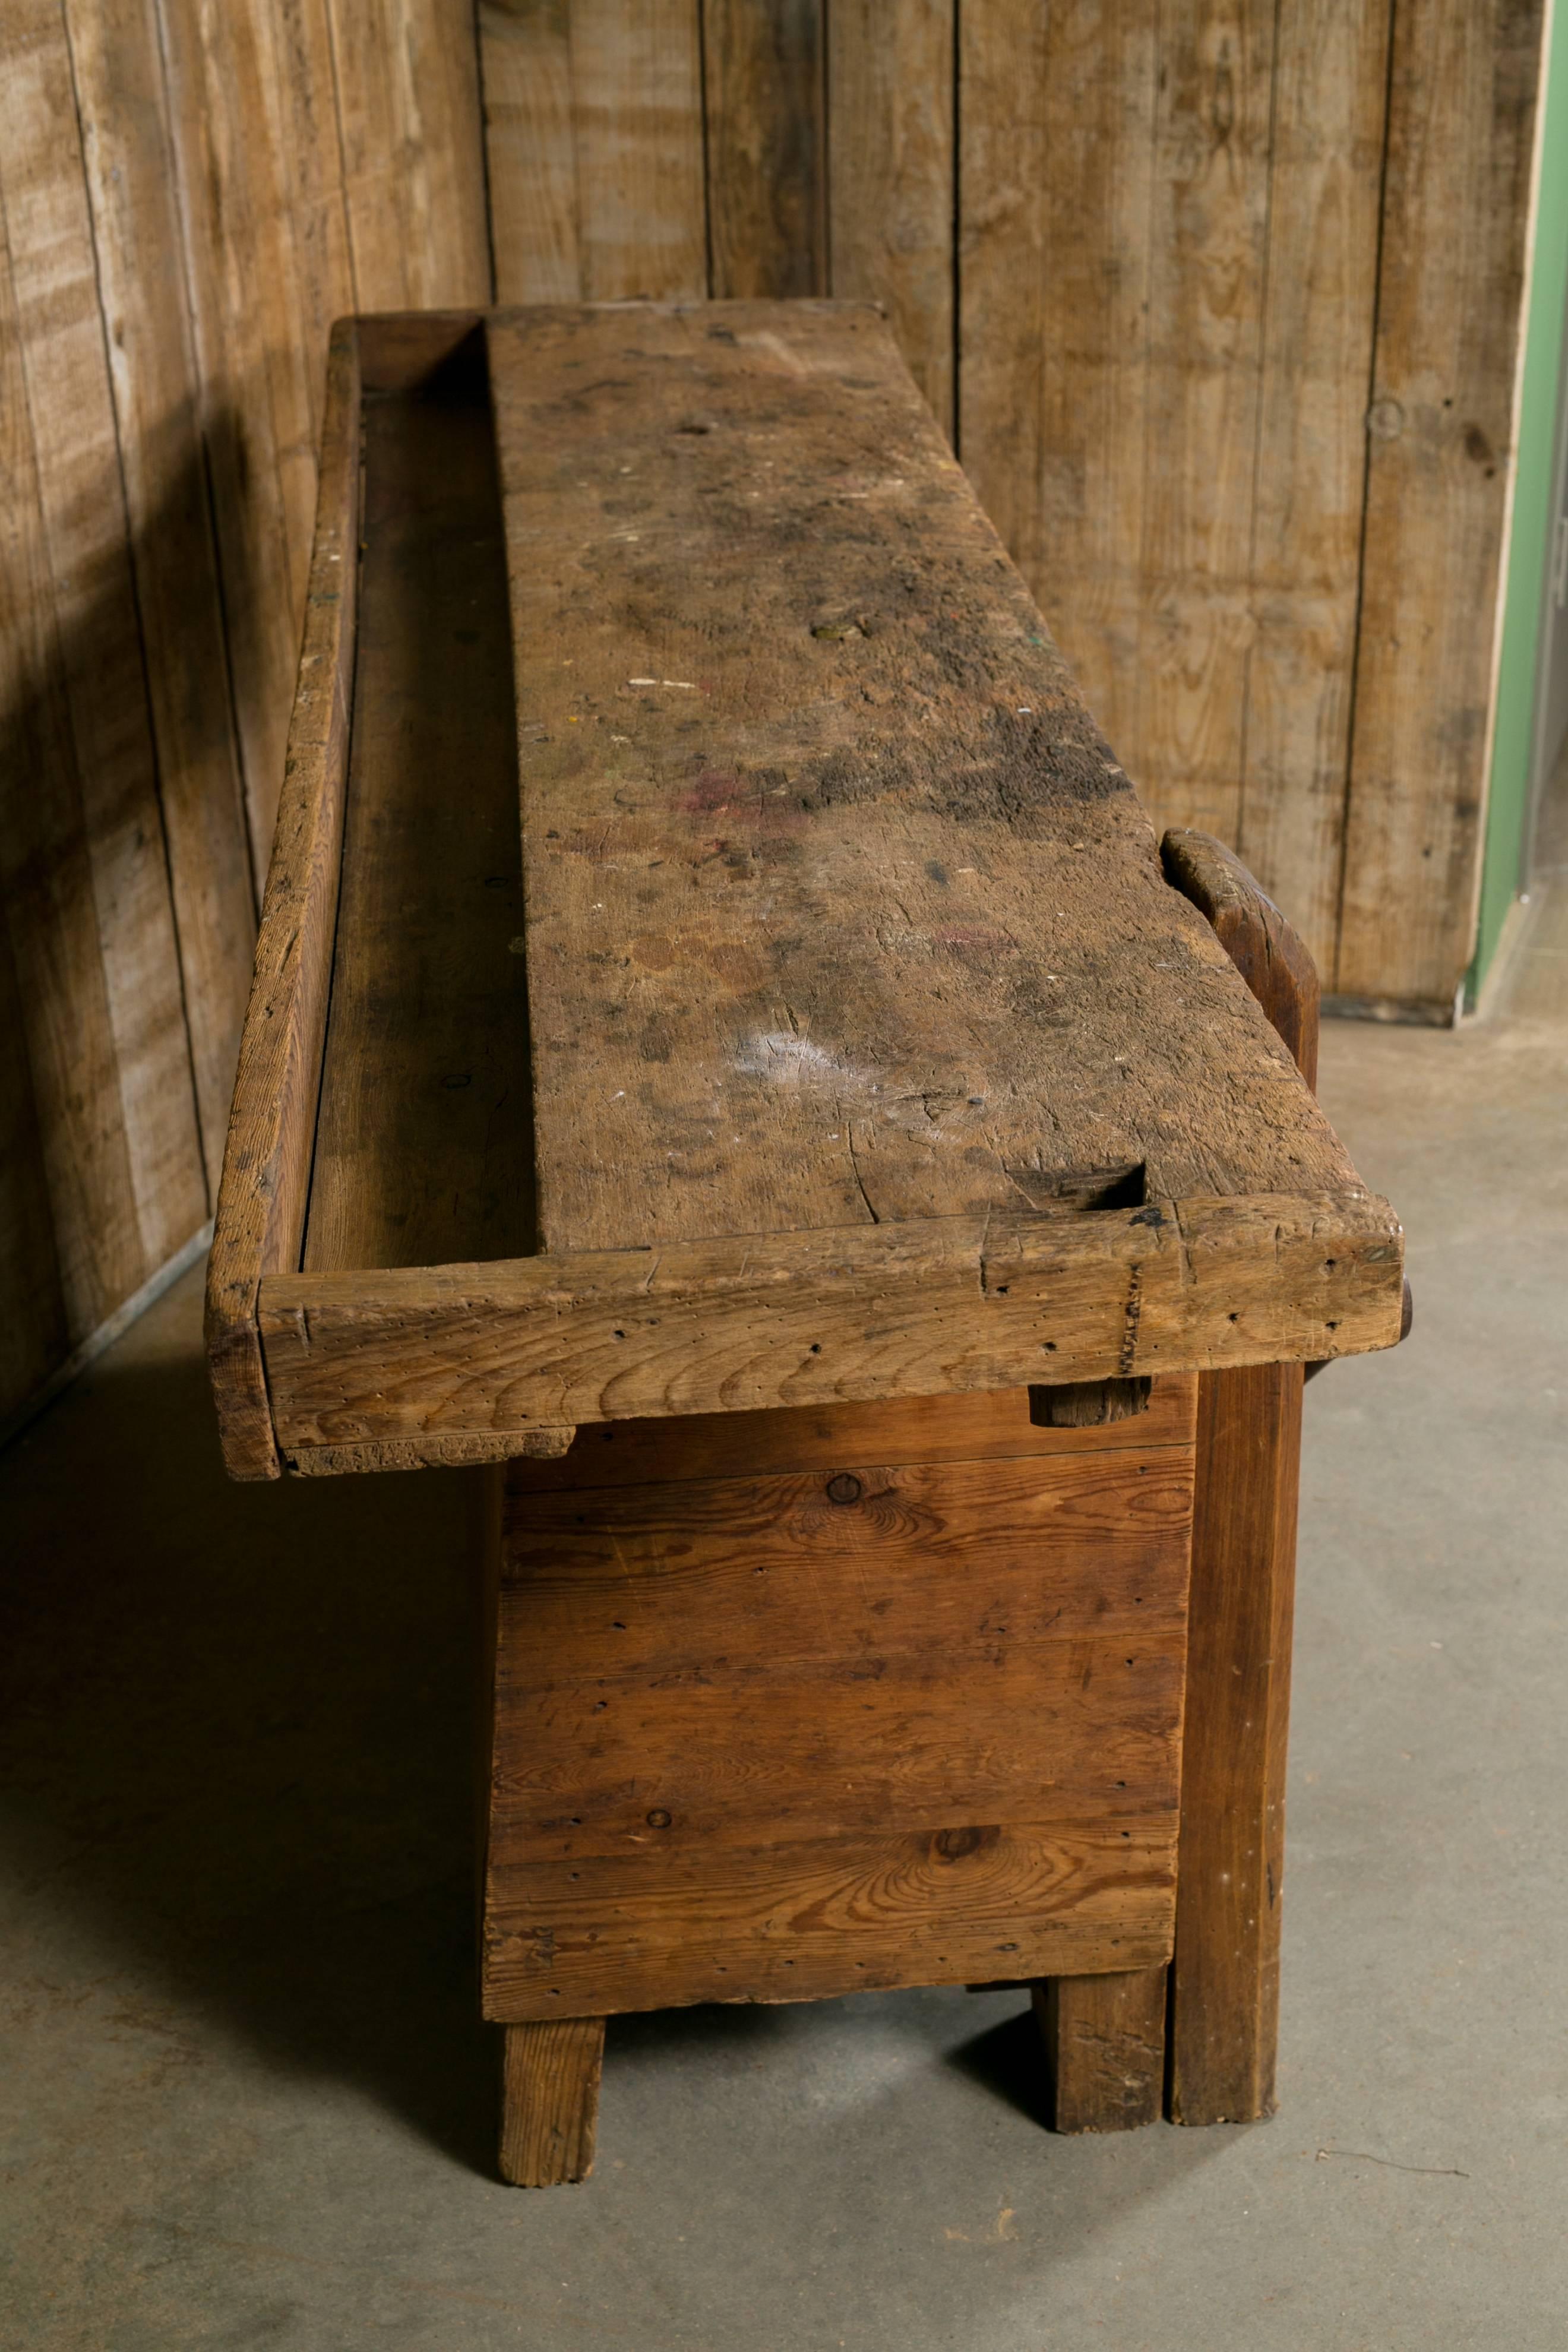 Unusual French work bench with closed front and shelf below. Features a trough top and original iron vise on the front. Would make a great rustic kitchen island, console or sofa table.